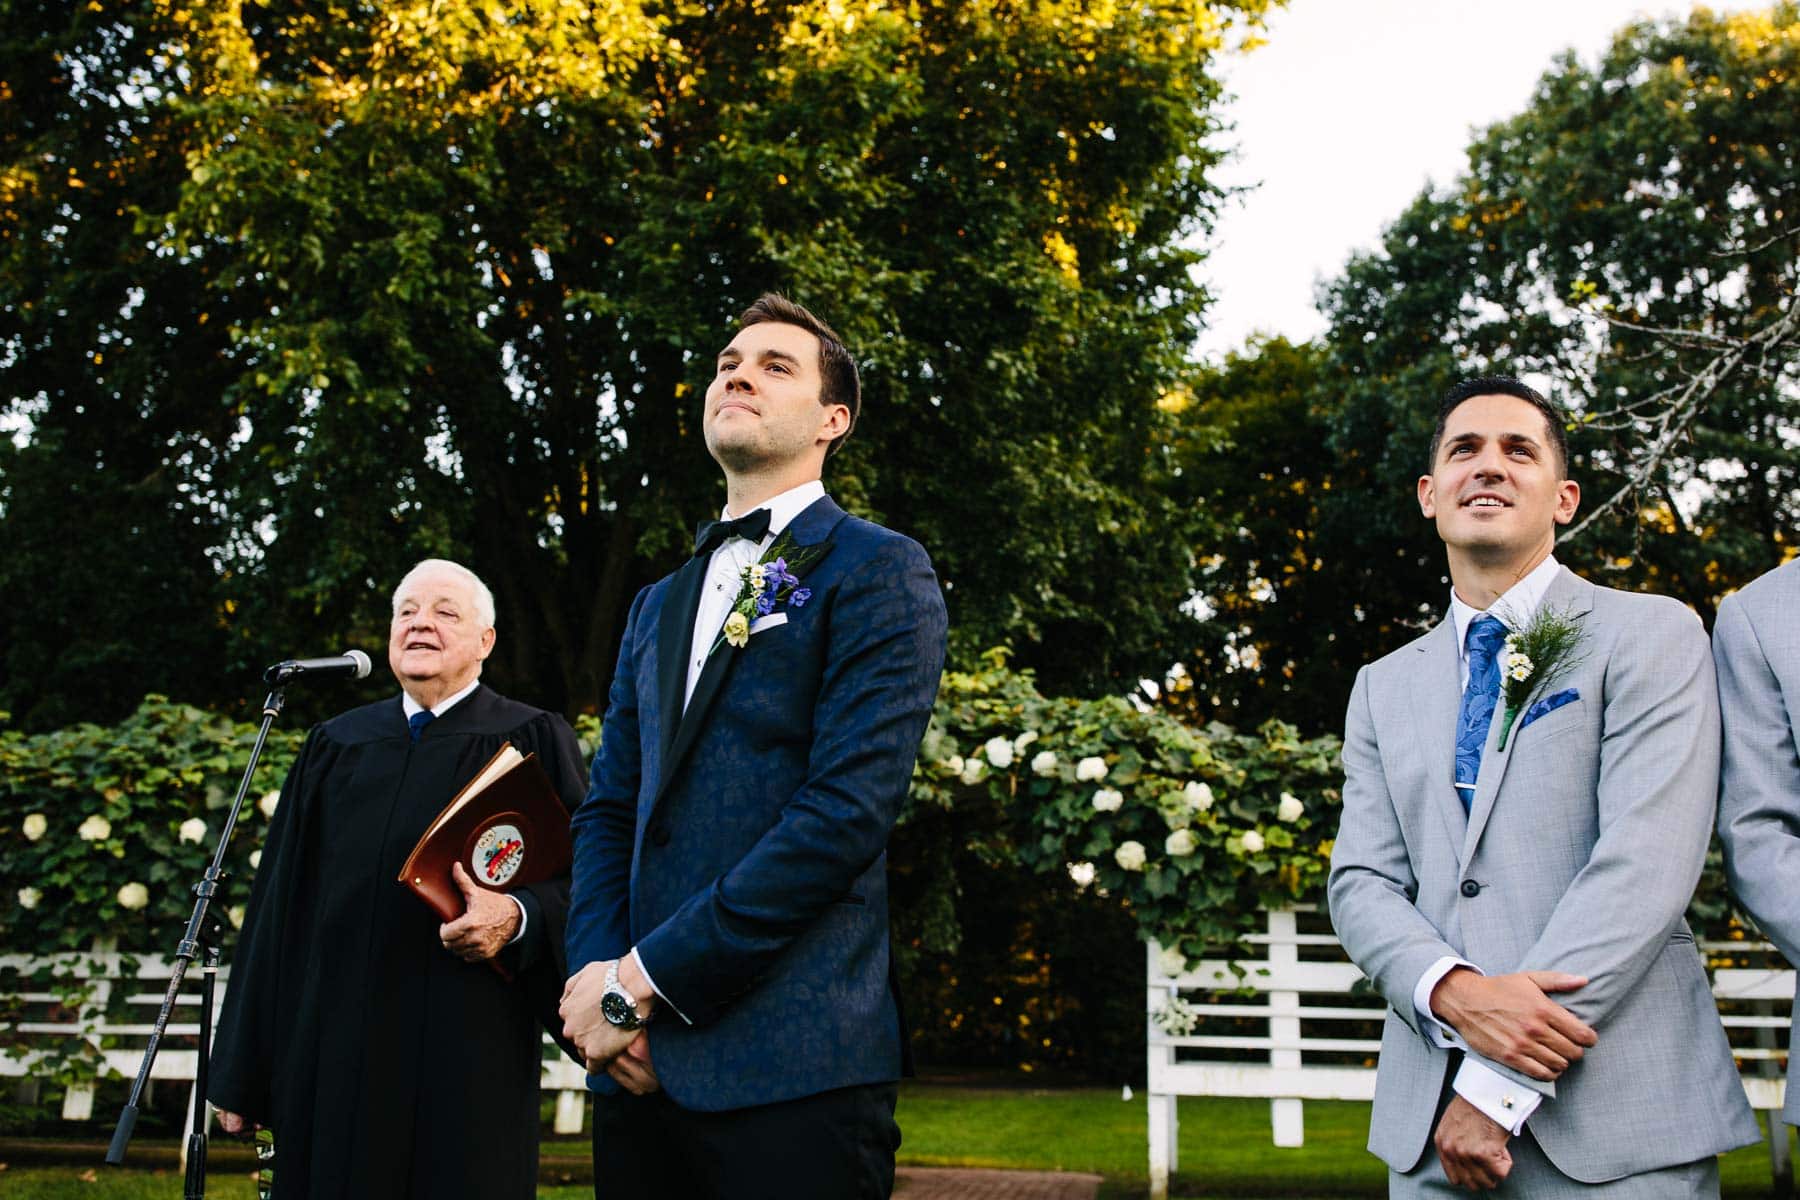 groom waiting for bride to walk down aisle | Kelly Benvenuto Photography